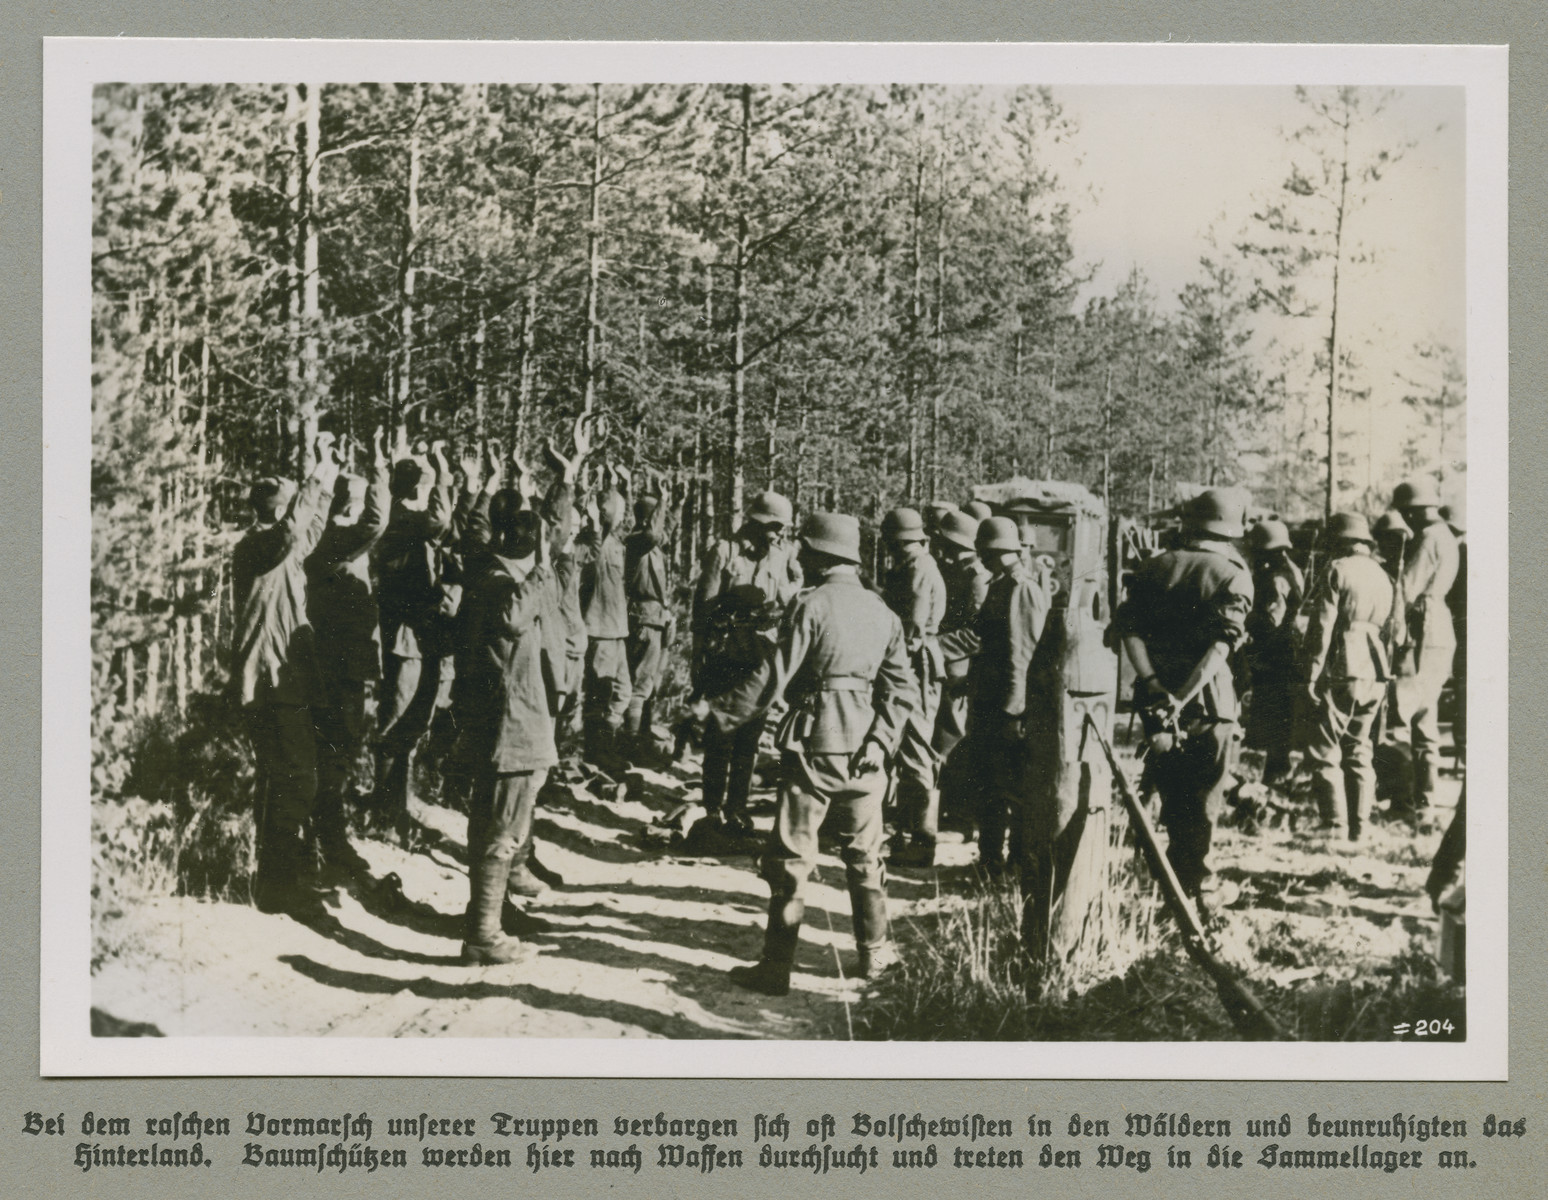 Men with their hands raised are detained by German forces.

Original Caption reads: During the rapid advance of German forces Bolshevists often hid in the forests and agitated the back country. In this image Baumschützen (forest snipers) are searched for weapons and make thier way to the detention camp.